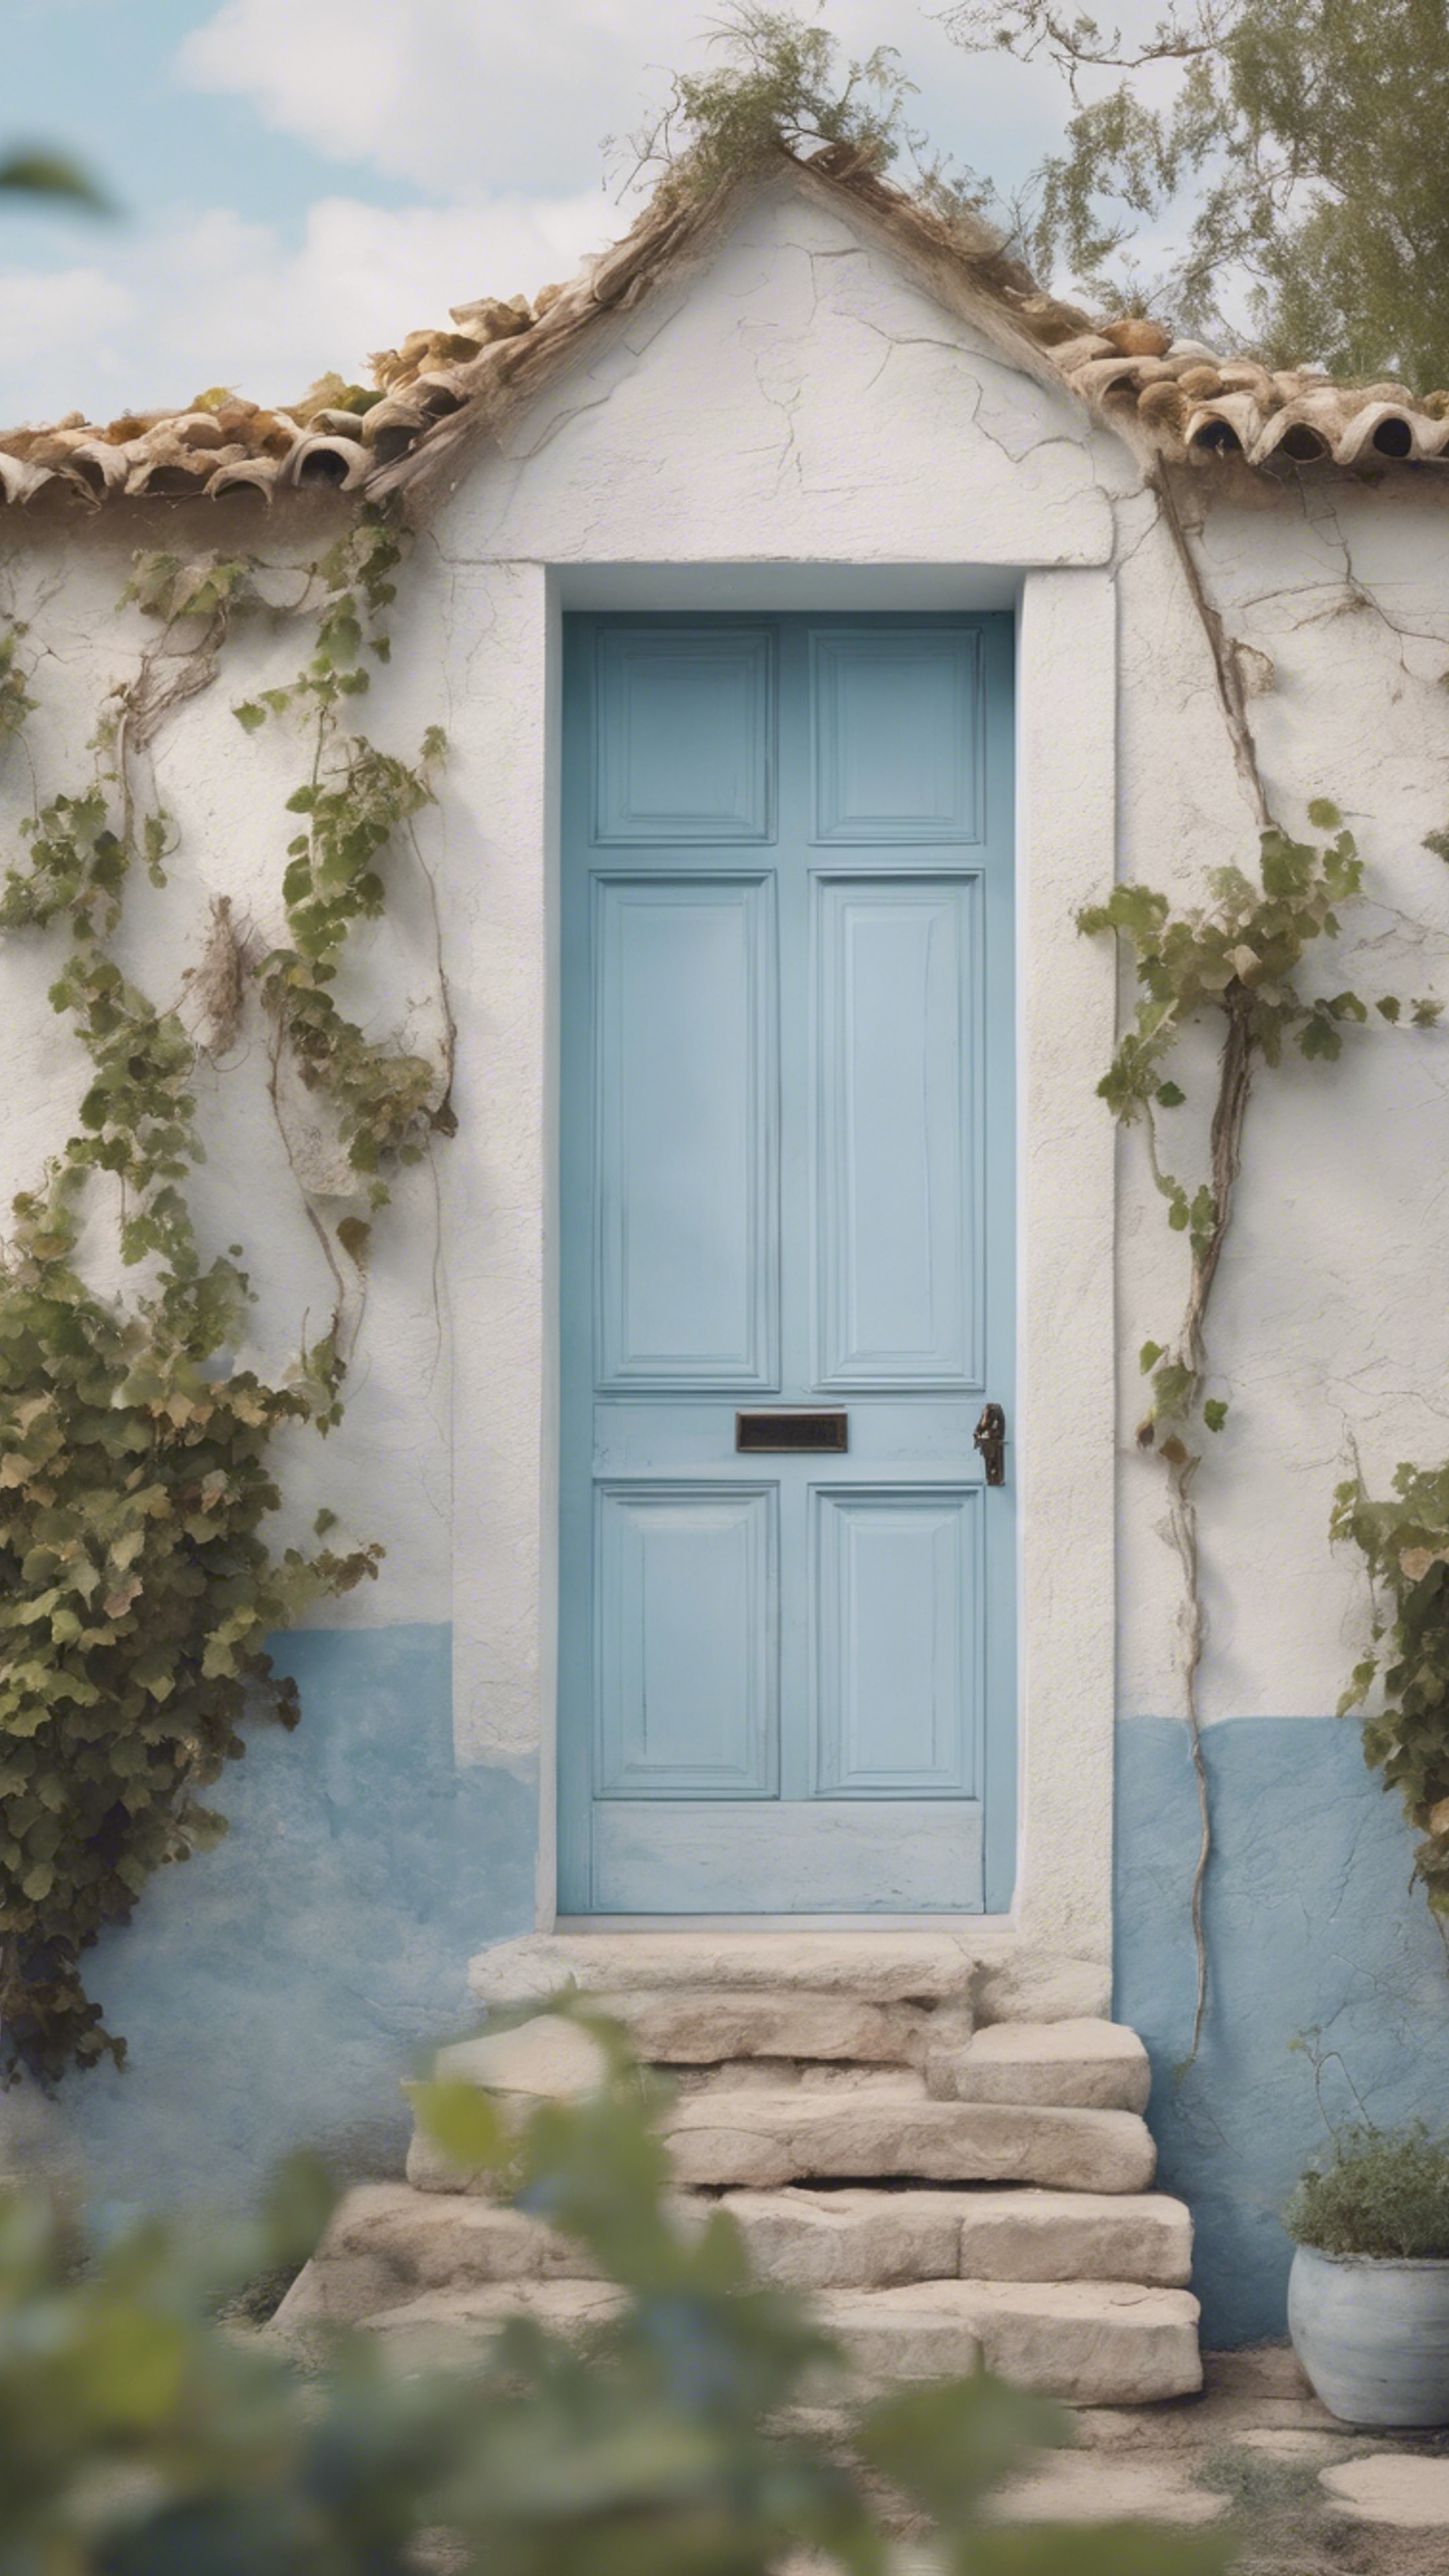 A pastel blue painted door on a rustic white house, a vineyard in the background. Sfondo[5cba61123f91494ab86f]